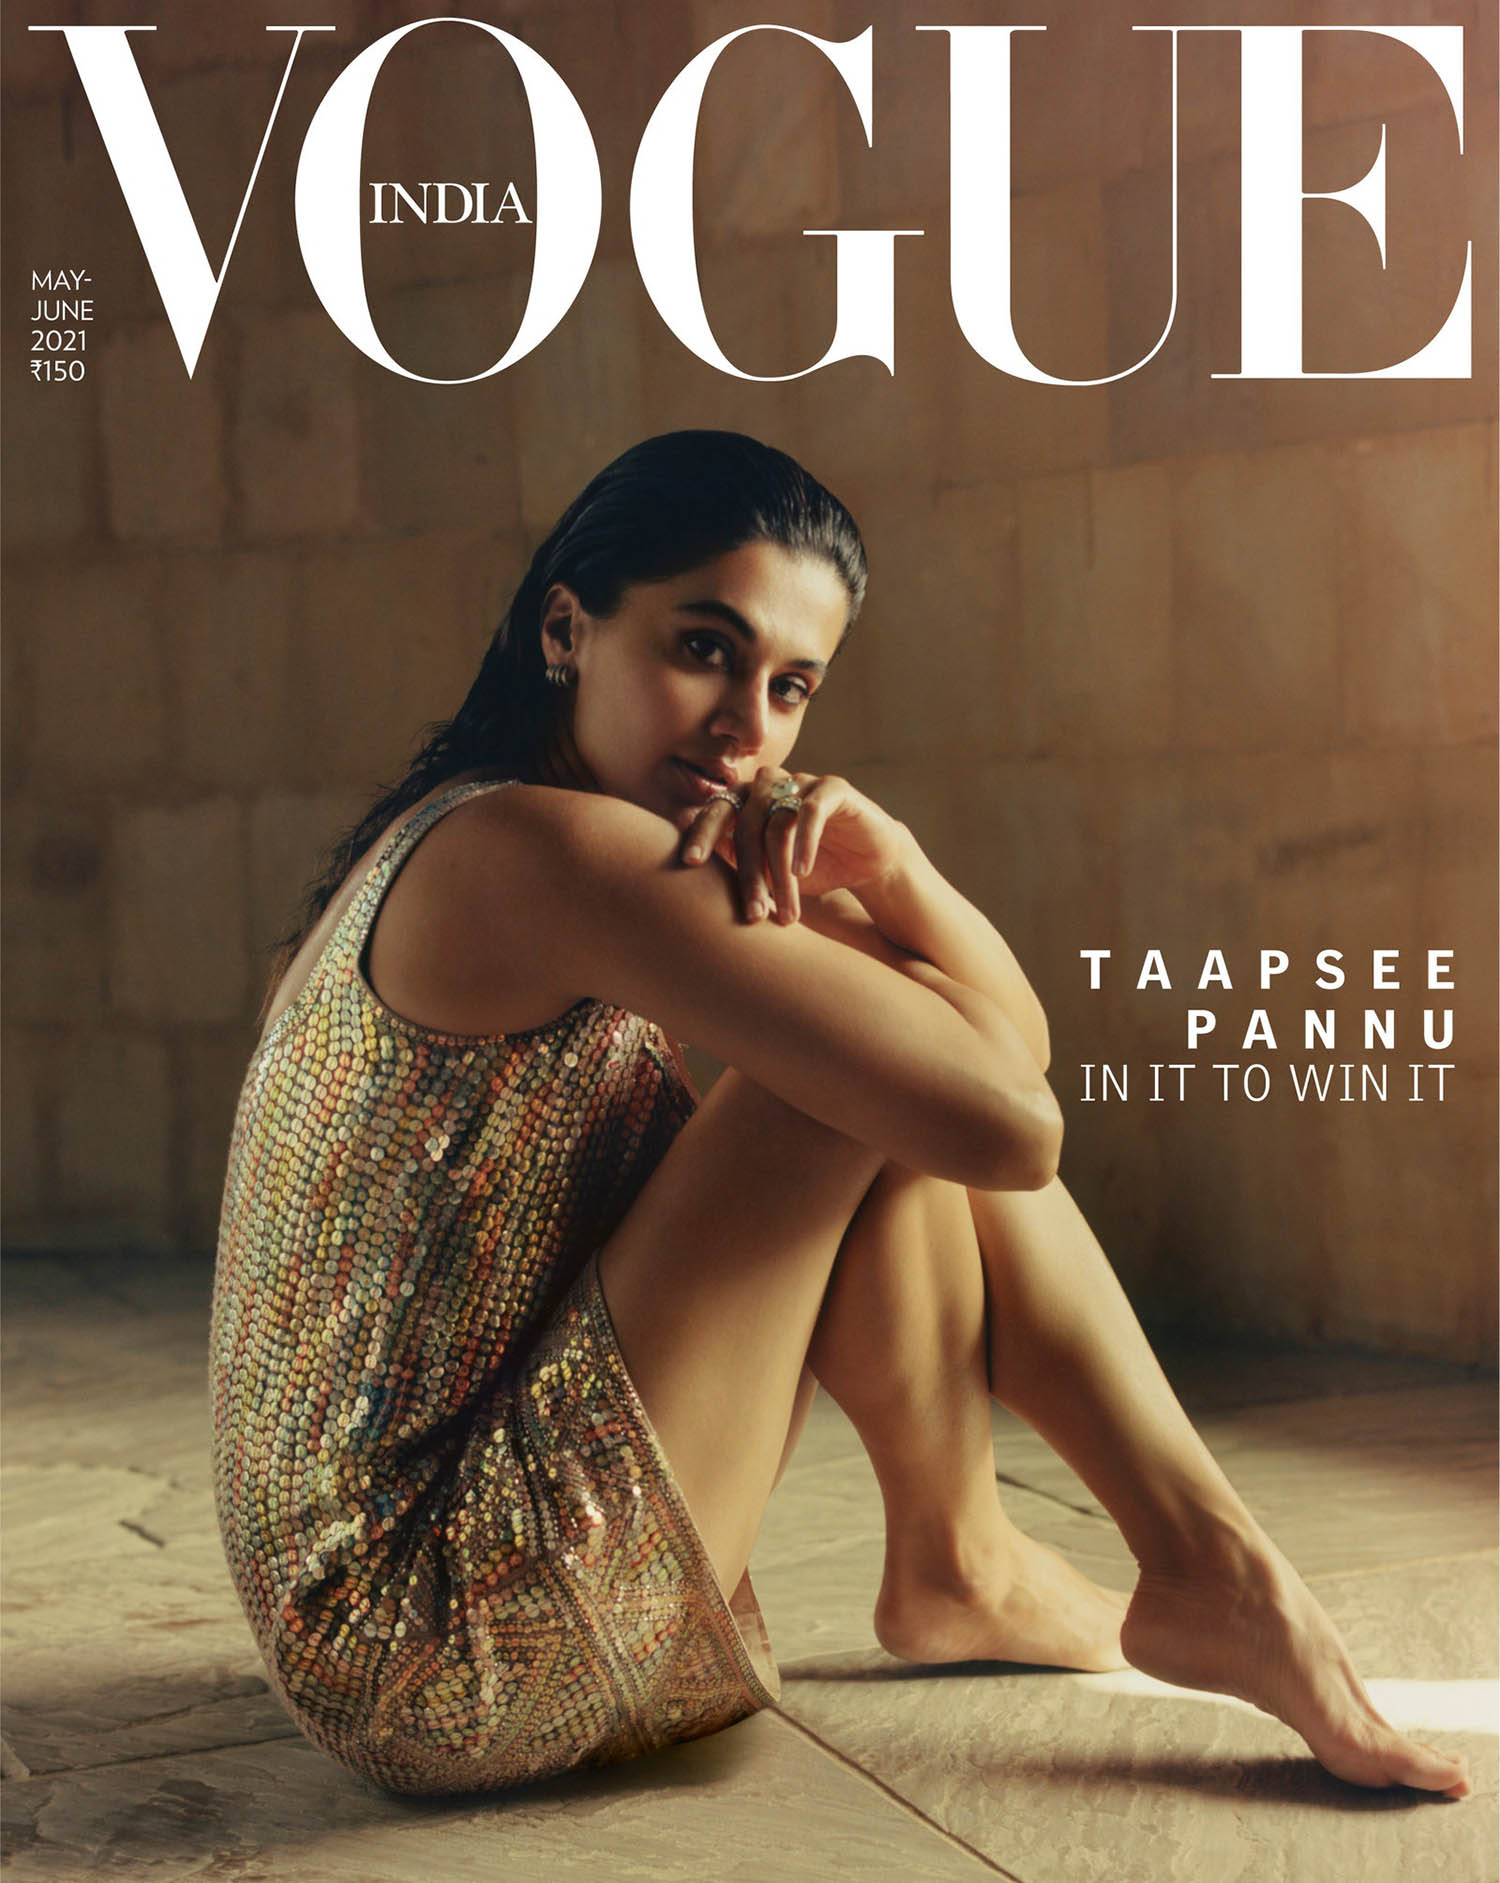 Taapsee Pannu covers Vogue India May June 2021 by Bikramjit Bose